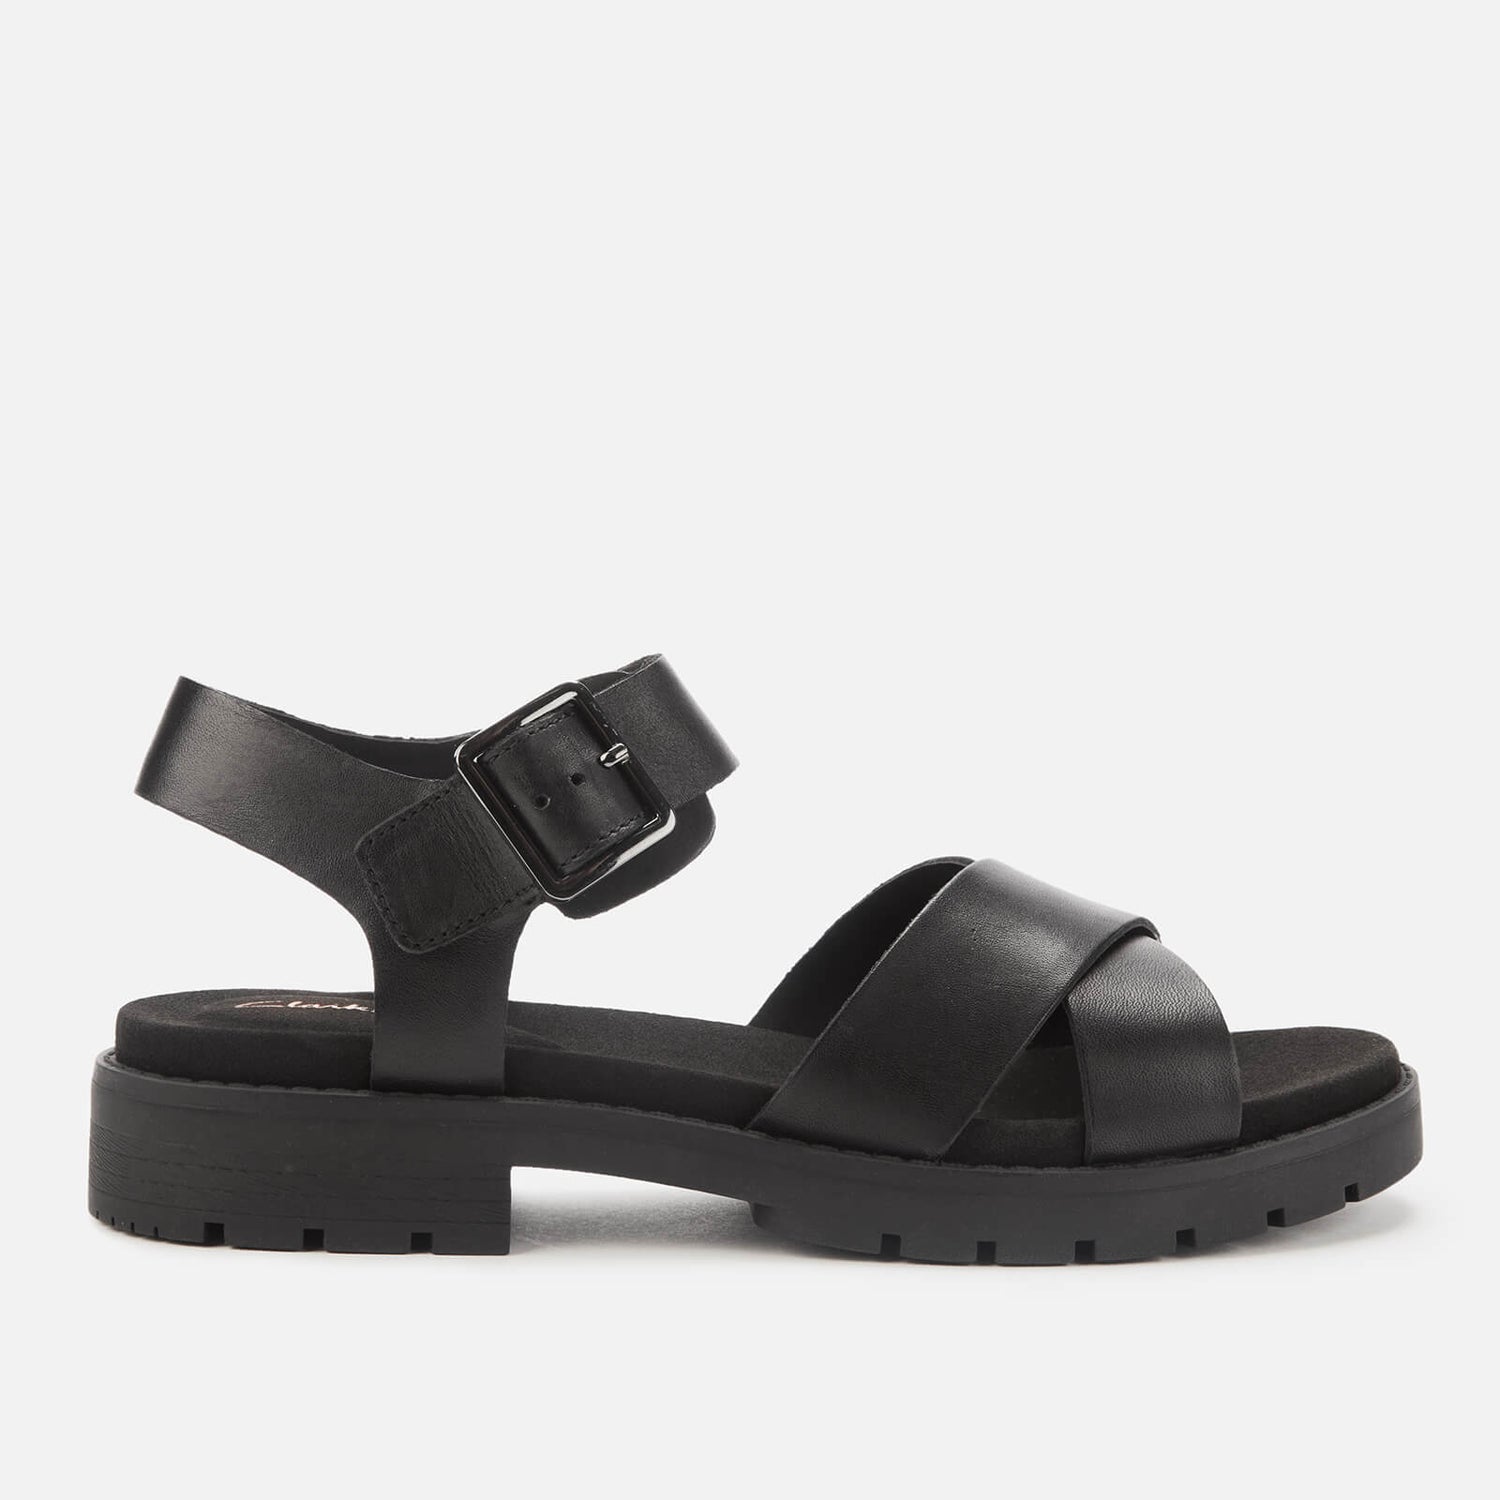 Clarks Women's Orinoco Strap Leather Sandals - Black | FREE UK Delivery ...